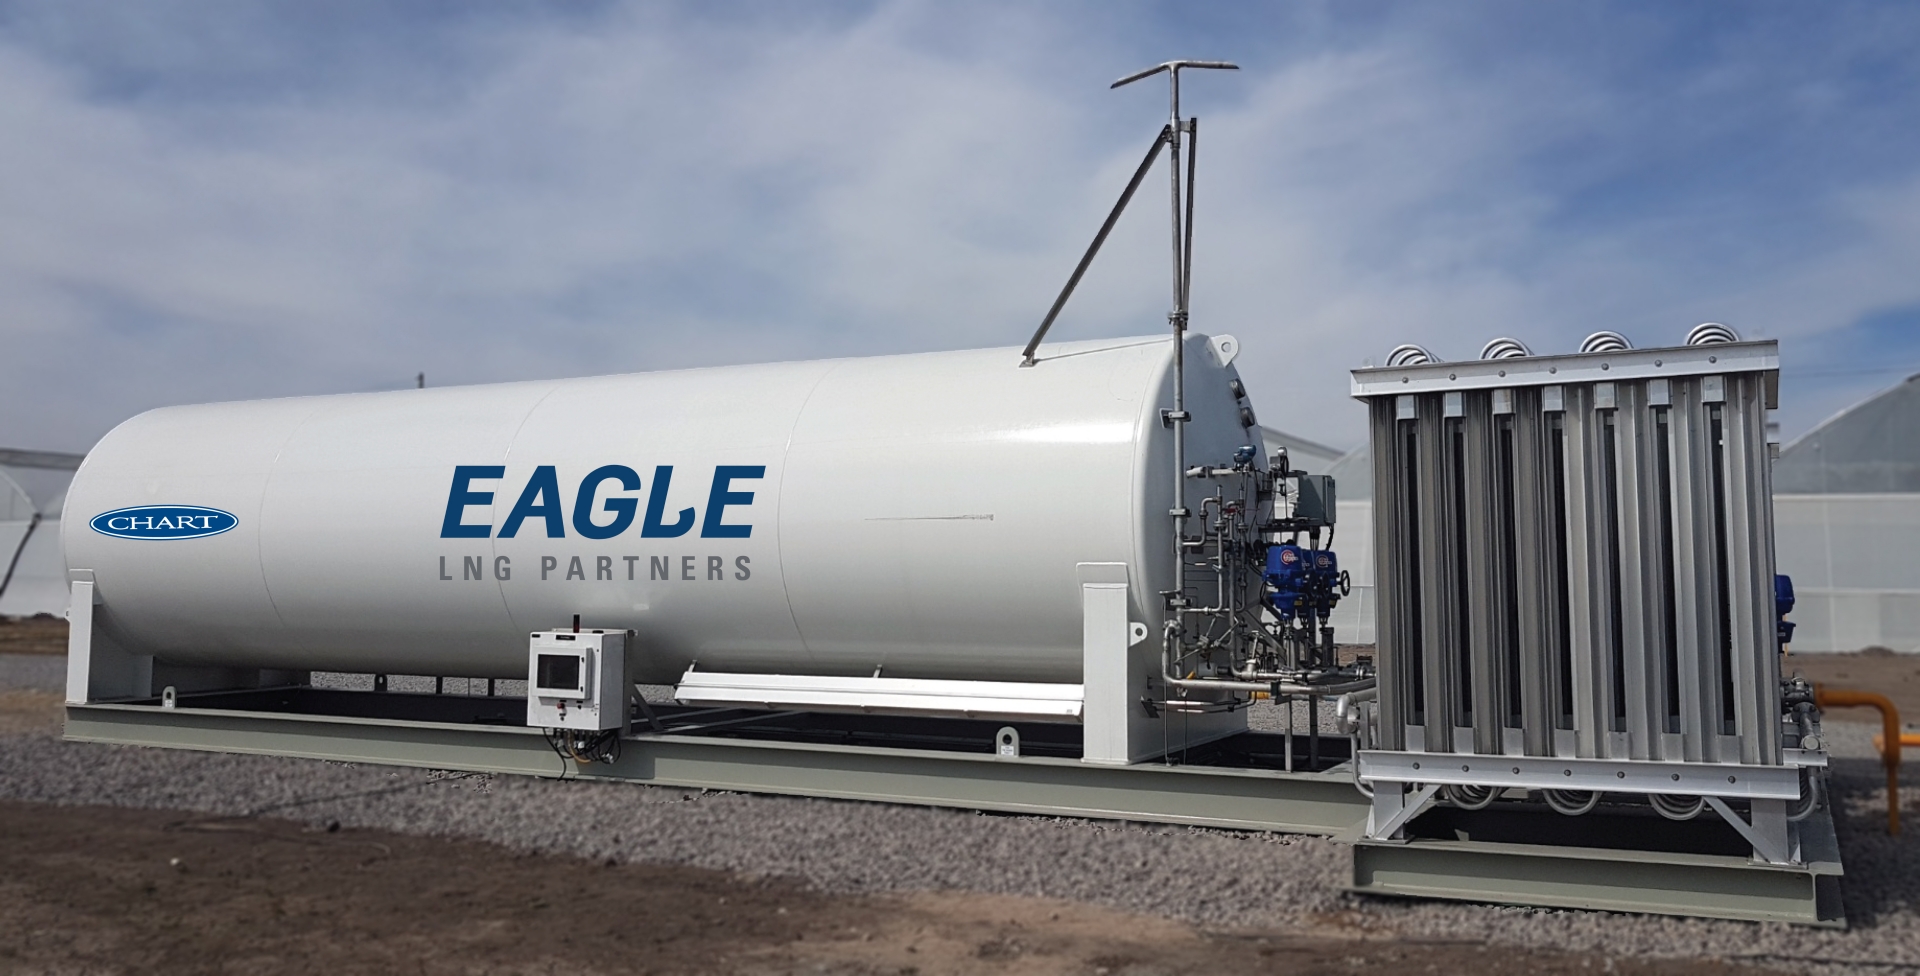 Eagle LNG solution picked for Barbuda